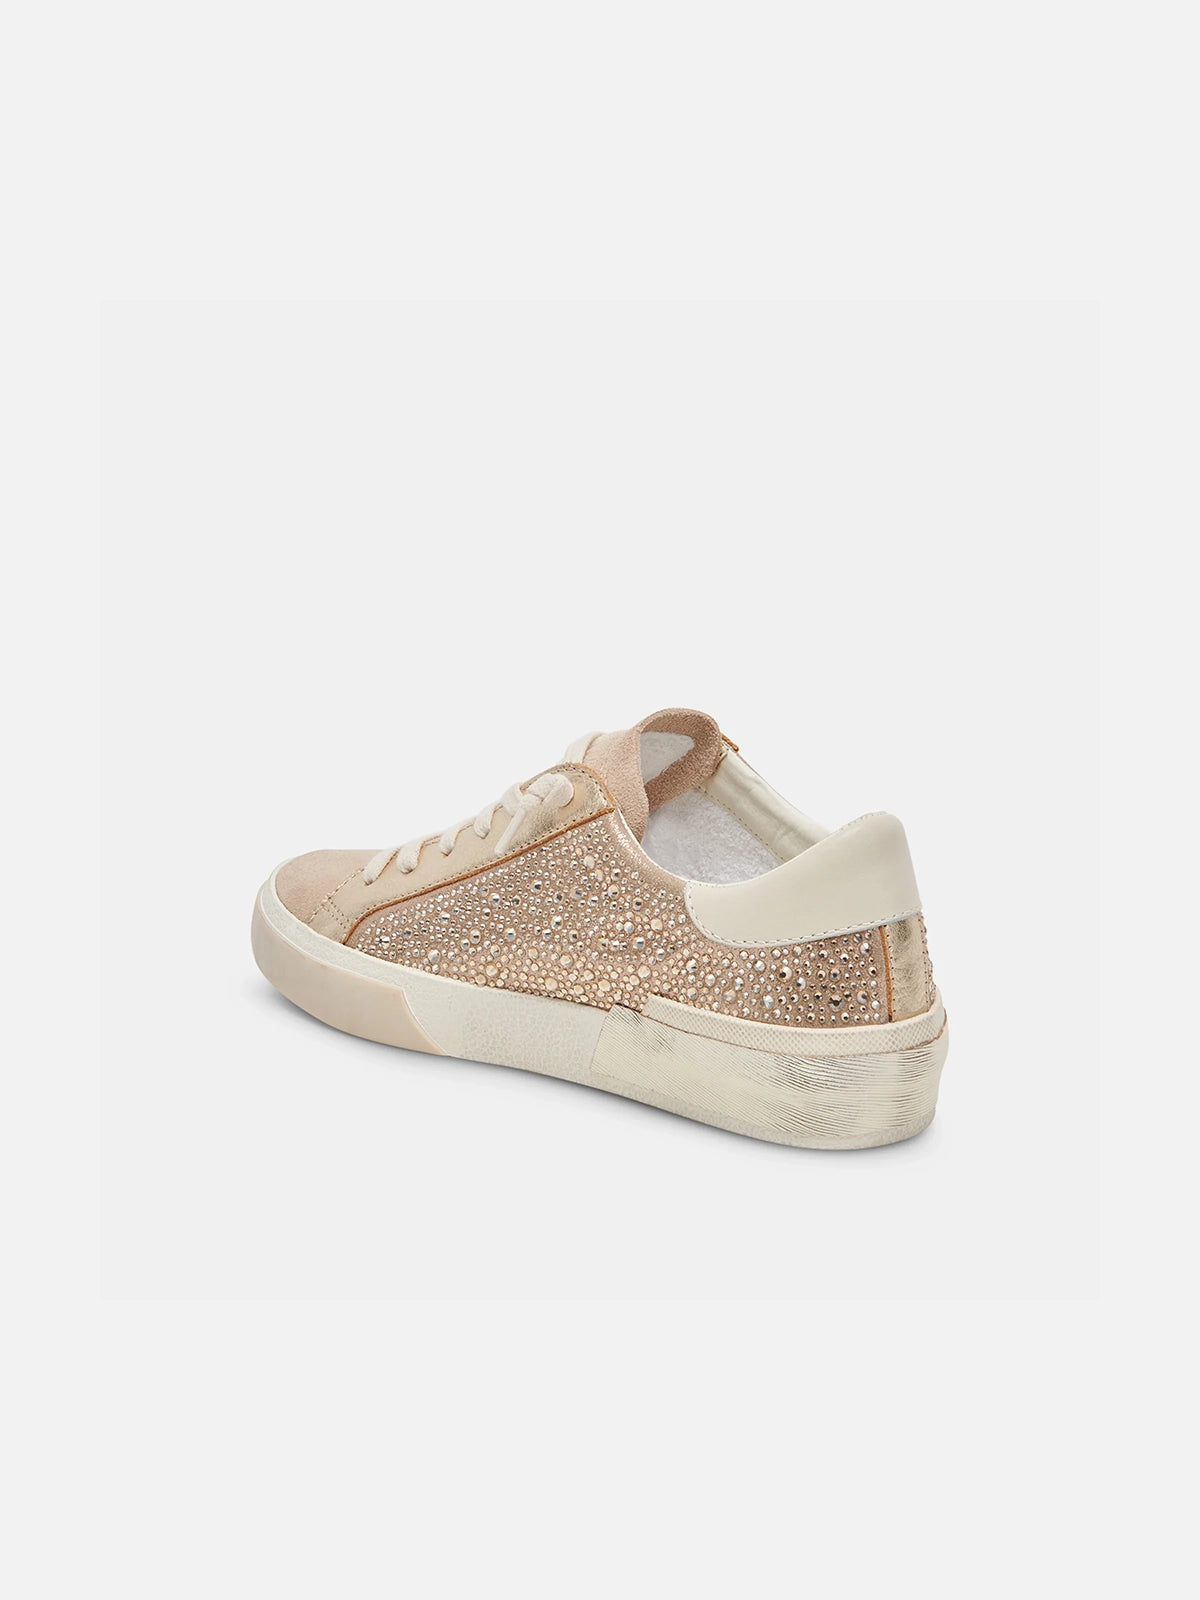 dolce vita zina crystal sneakers in gold suede